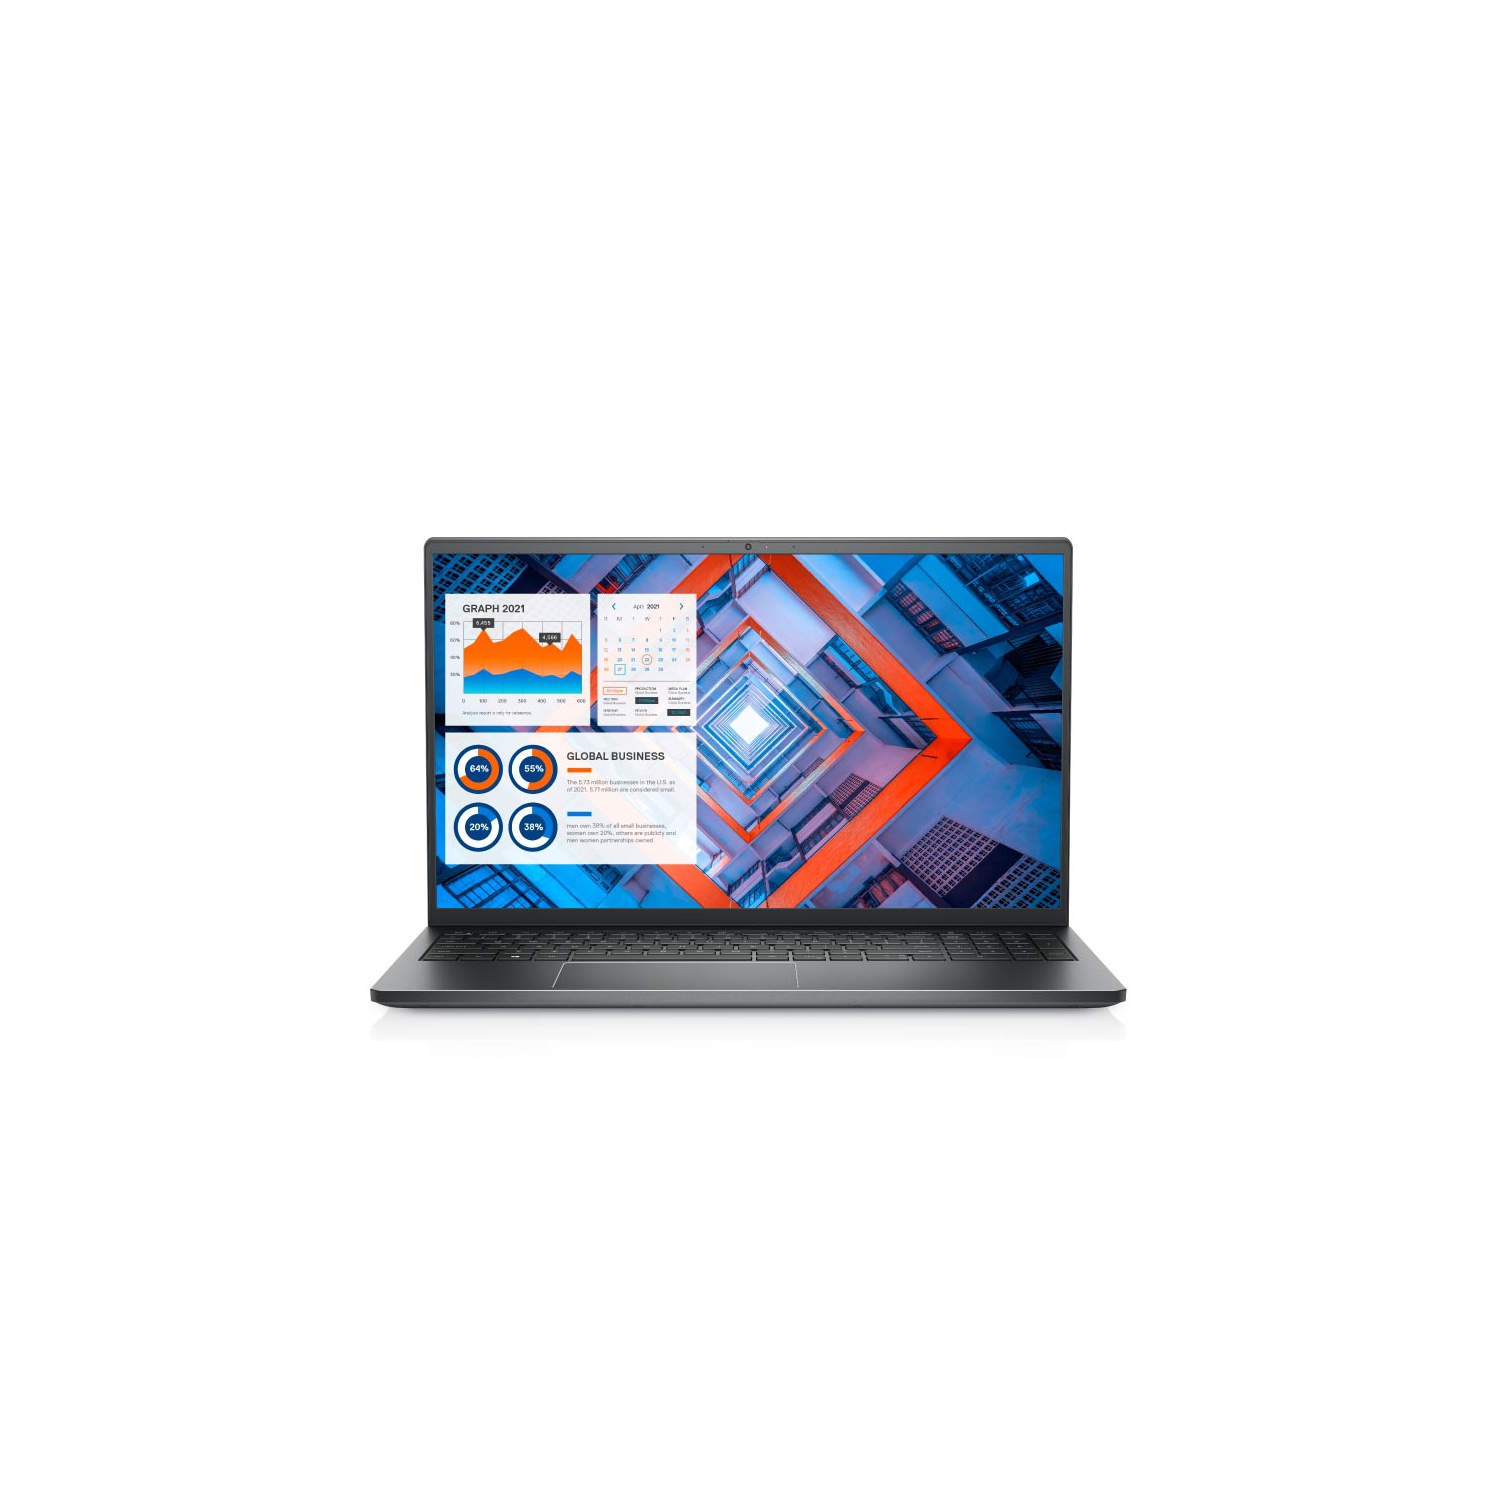 Refurbished (Excellent) DELL VOSTRO 7510 Laptop 15" FHD (GEFORCE RTX 3050 / i7-11800H / 16GB / 512GB SSD,NVMe / Windows 11 Pro) With brand new laptop bag